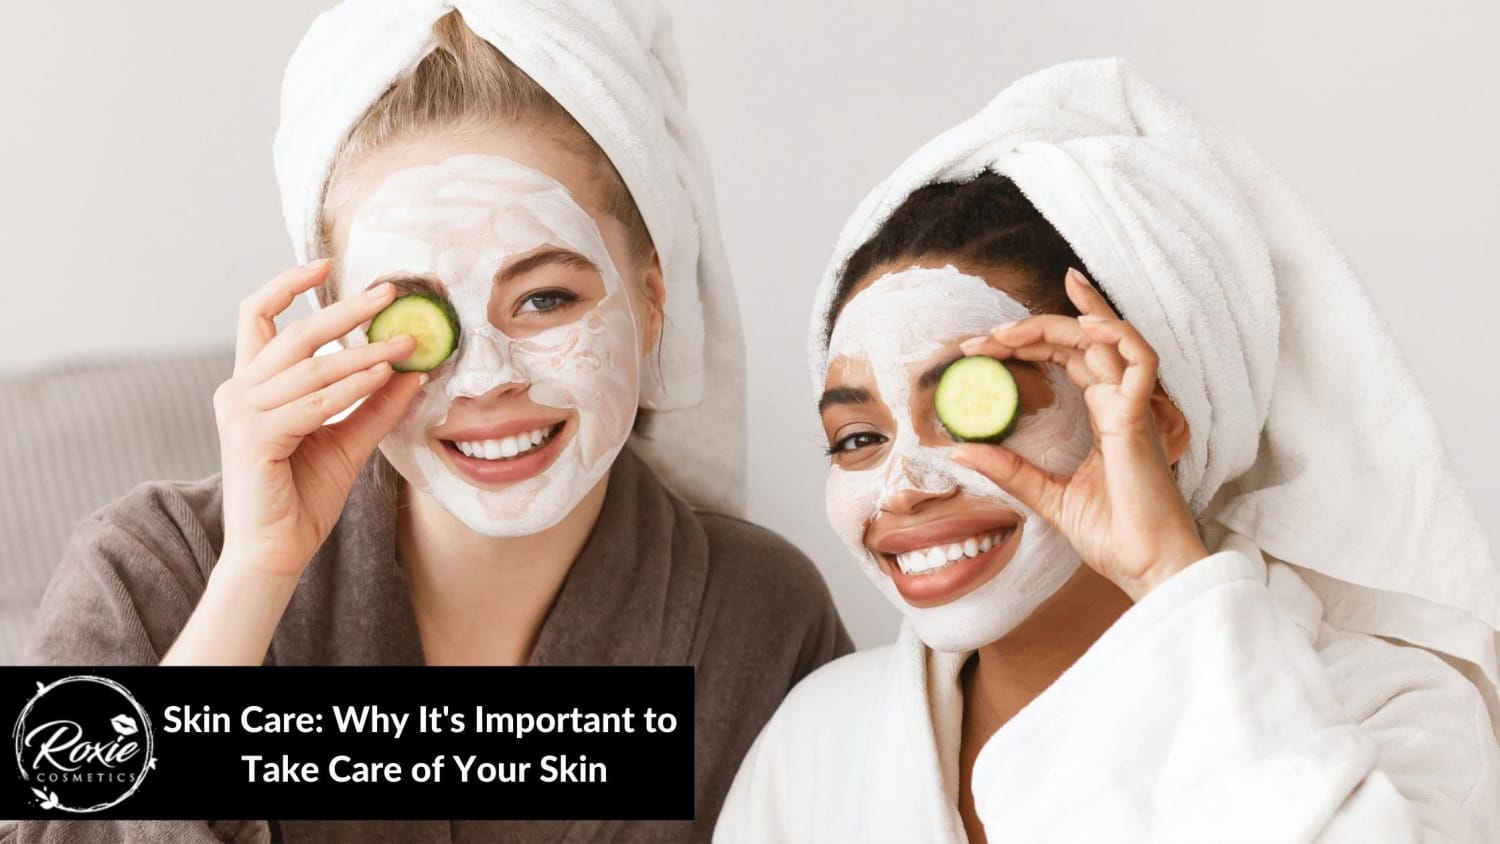 Skin Care: Why It's Important to Take Care of Your Skin